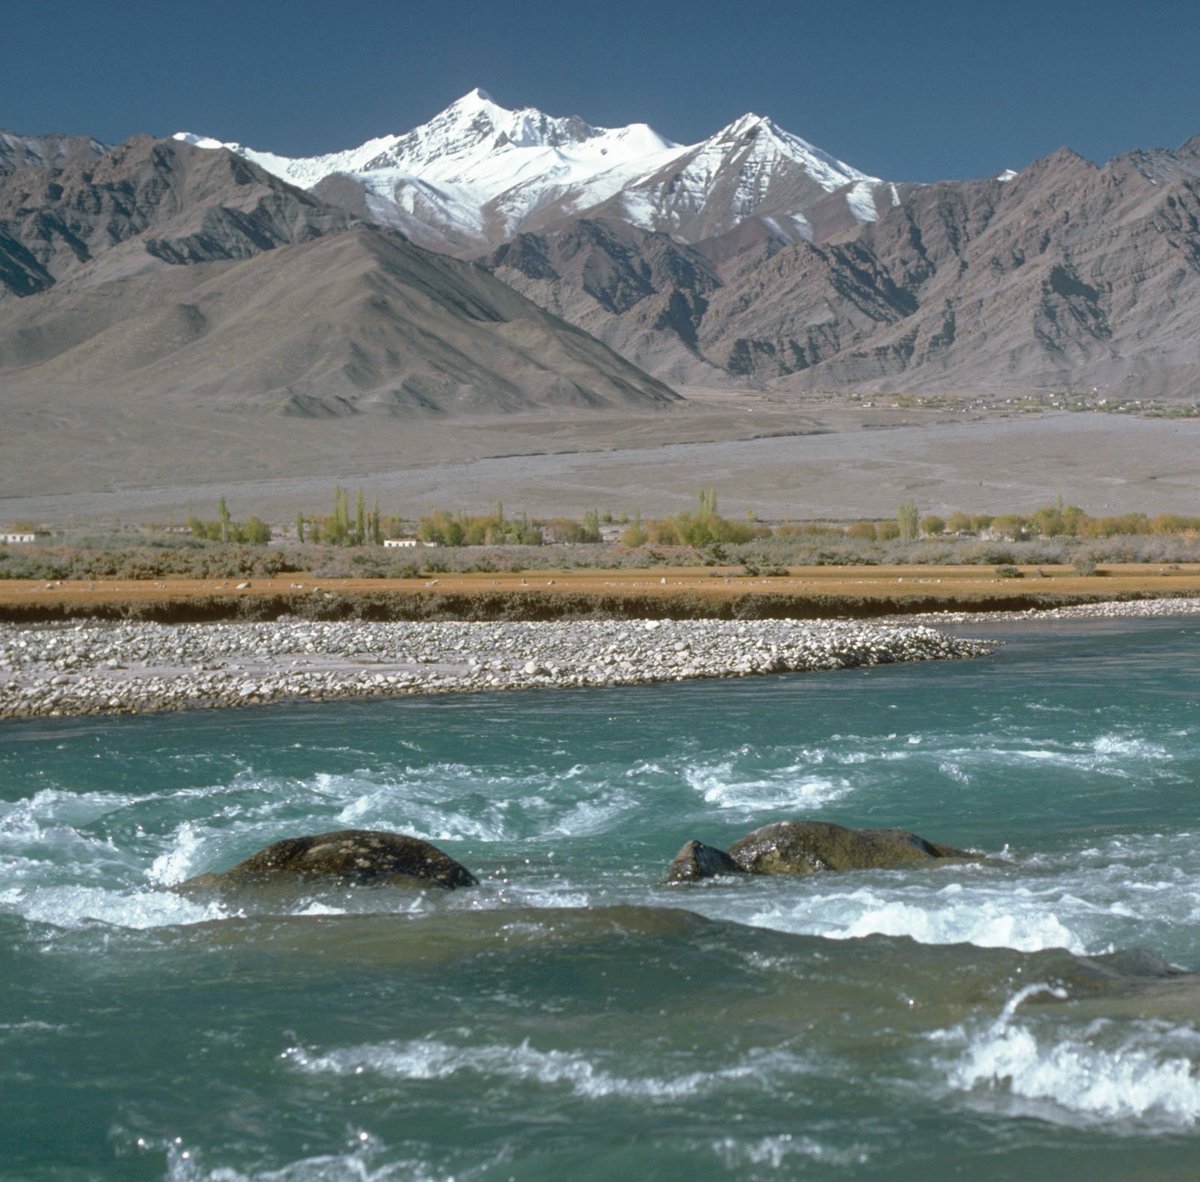 The rivers Satadru, ChandrabhAgA, and other rivers, flow from the foot of HimAlaya. VedasmRiti and others from the ParIpAtra.